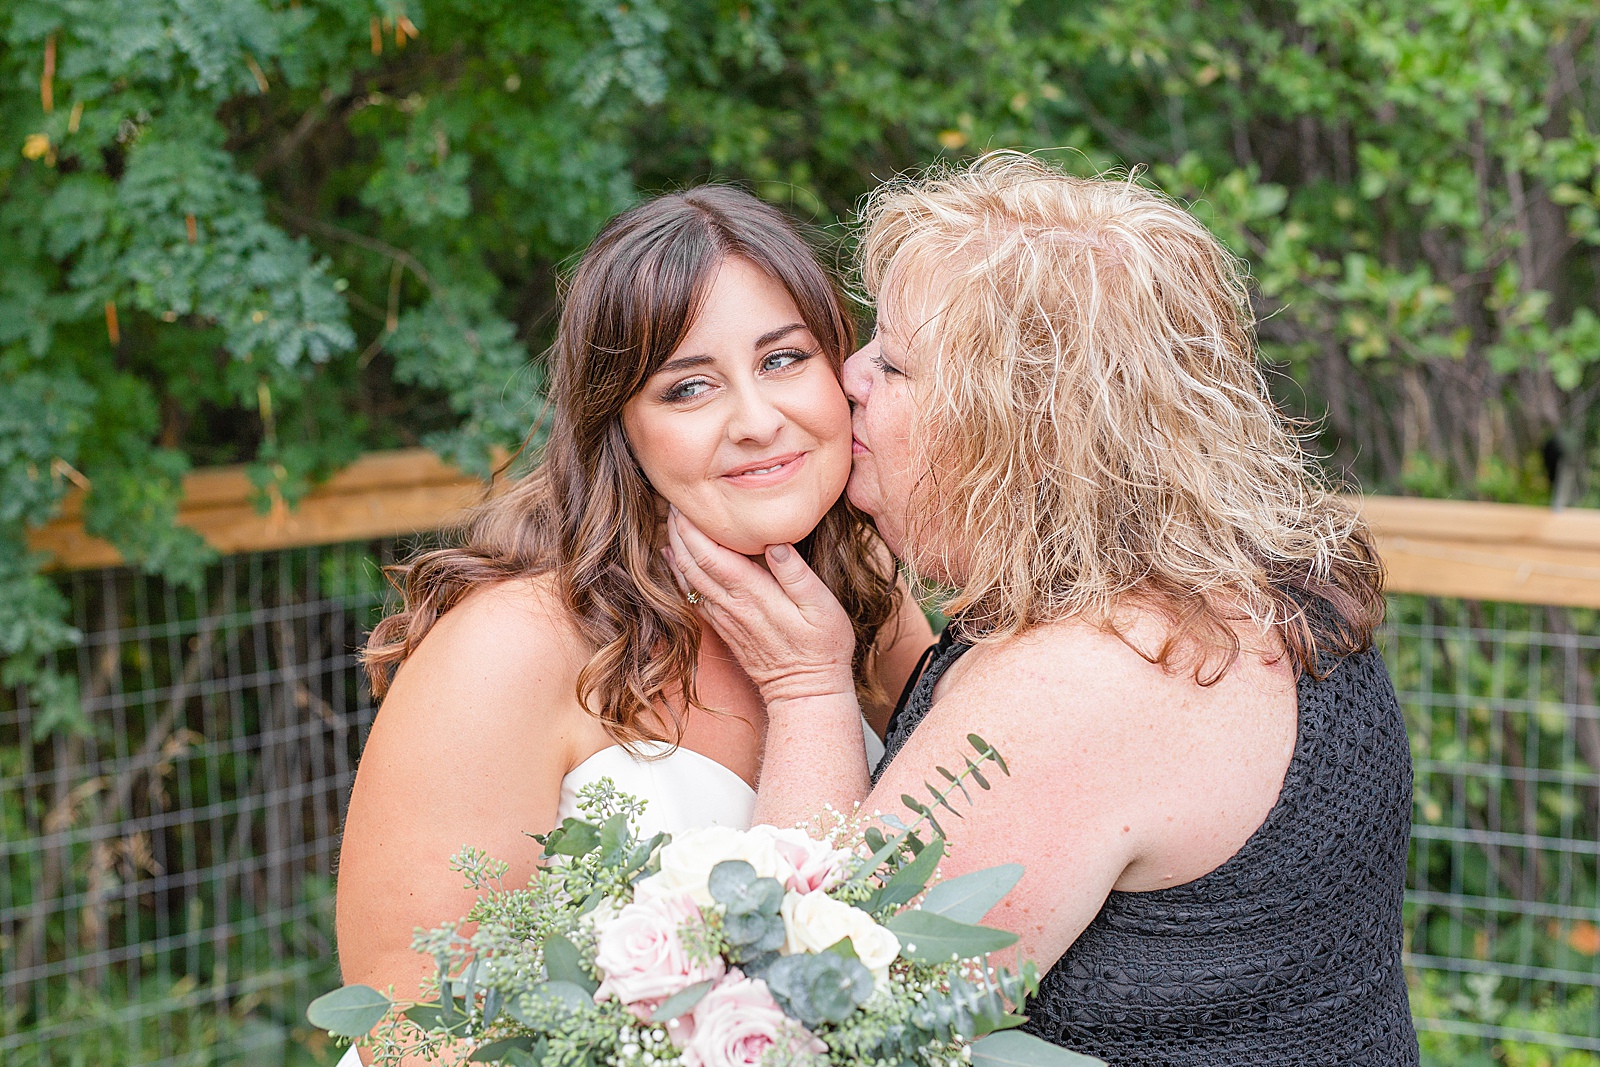 mom kissing daughter bride on the cheek